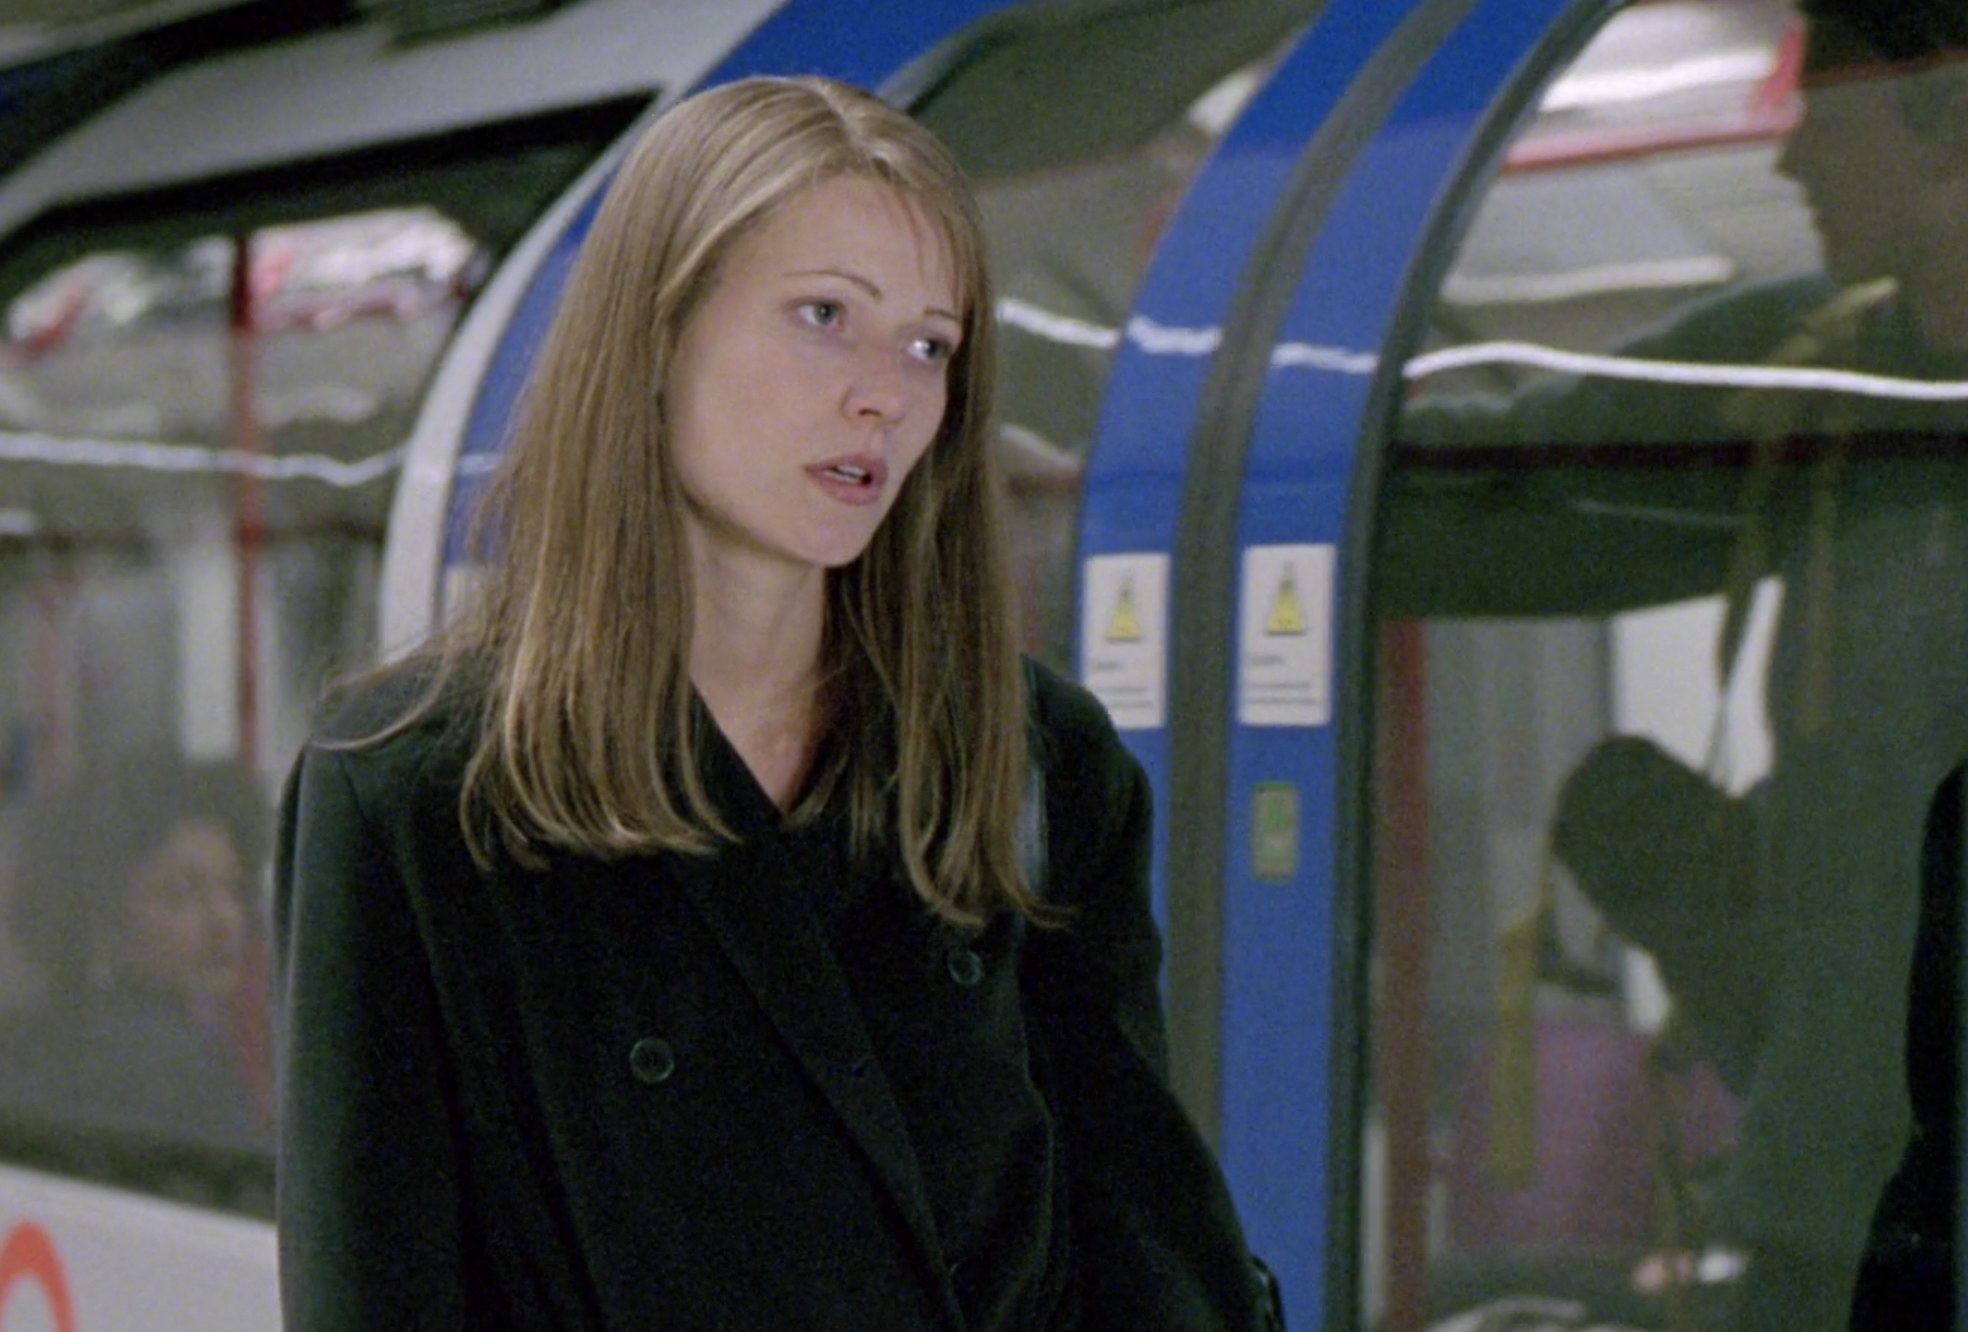 Gwyneth Paltrow stands outside of a subway and looks very upset.